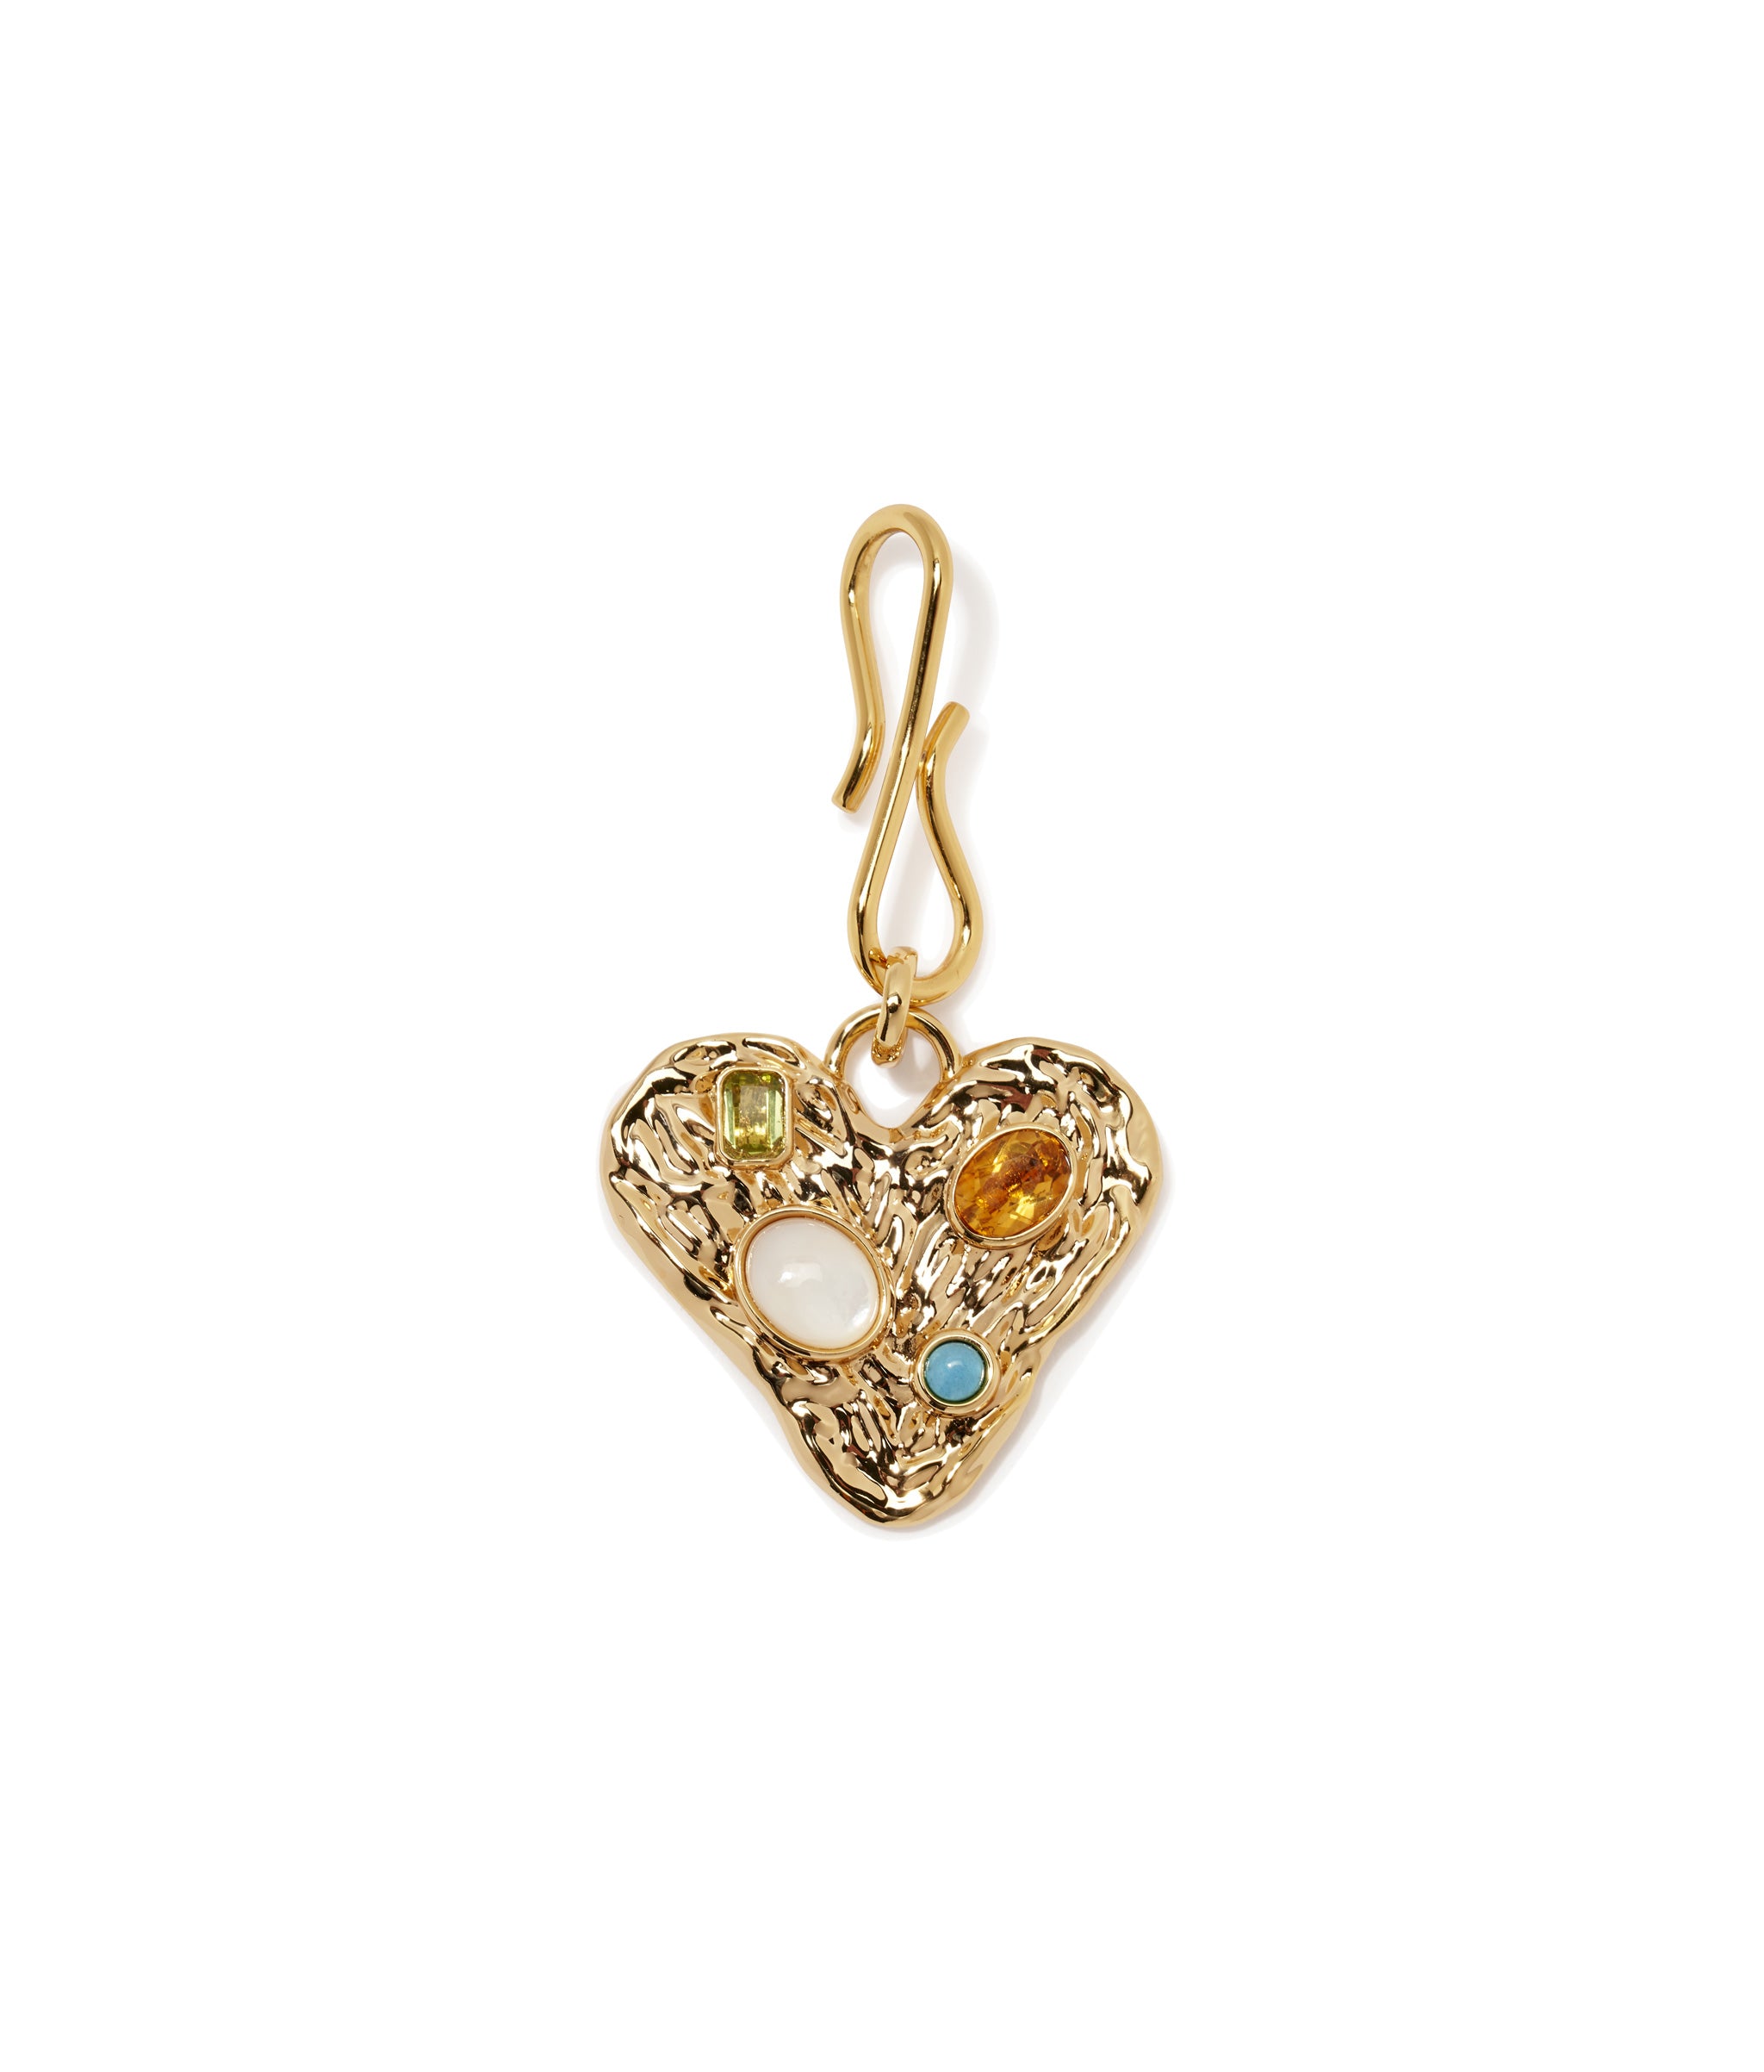 Treasure Trove Pendant. Textured gold-plated heart inset with peridot, citrine, turquoise, and mother-of-pearl stones.